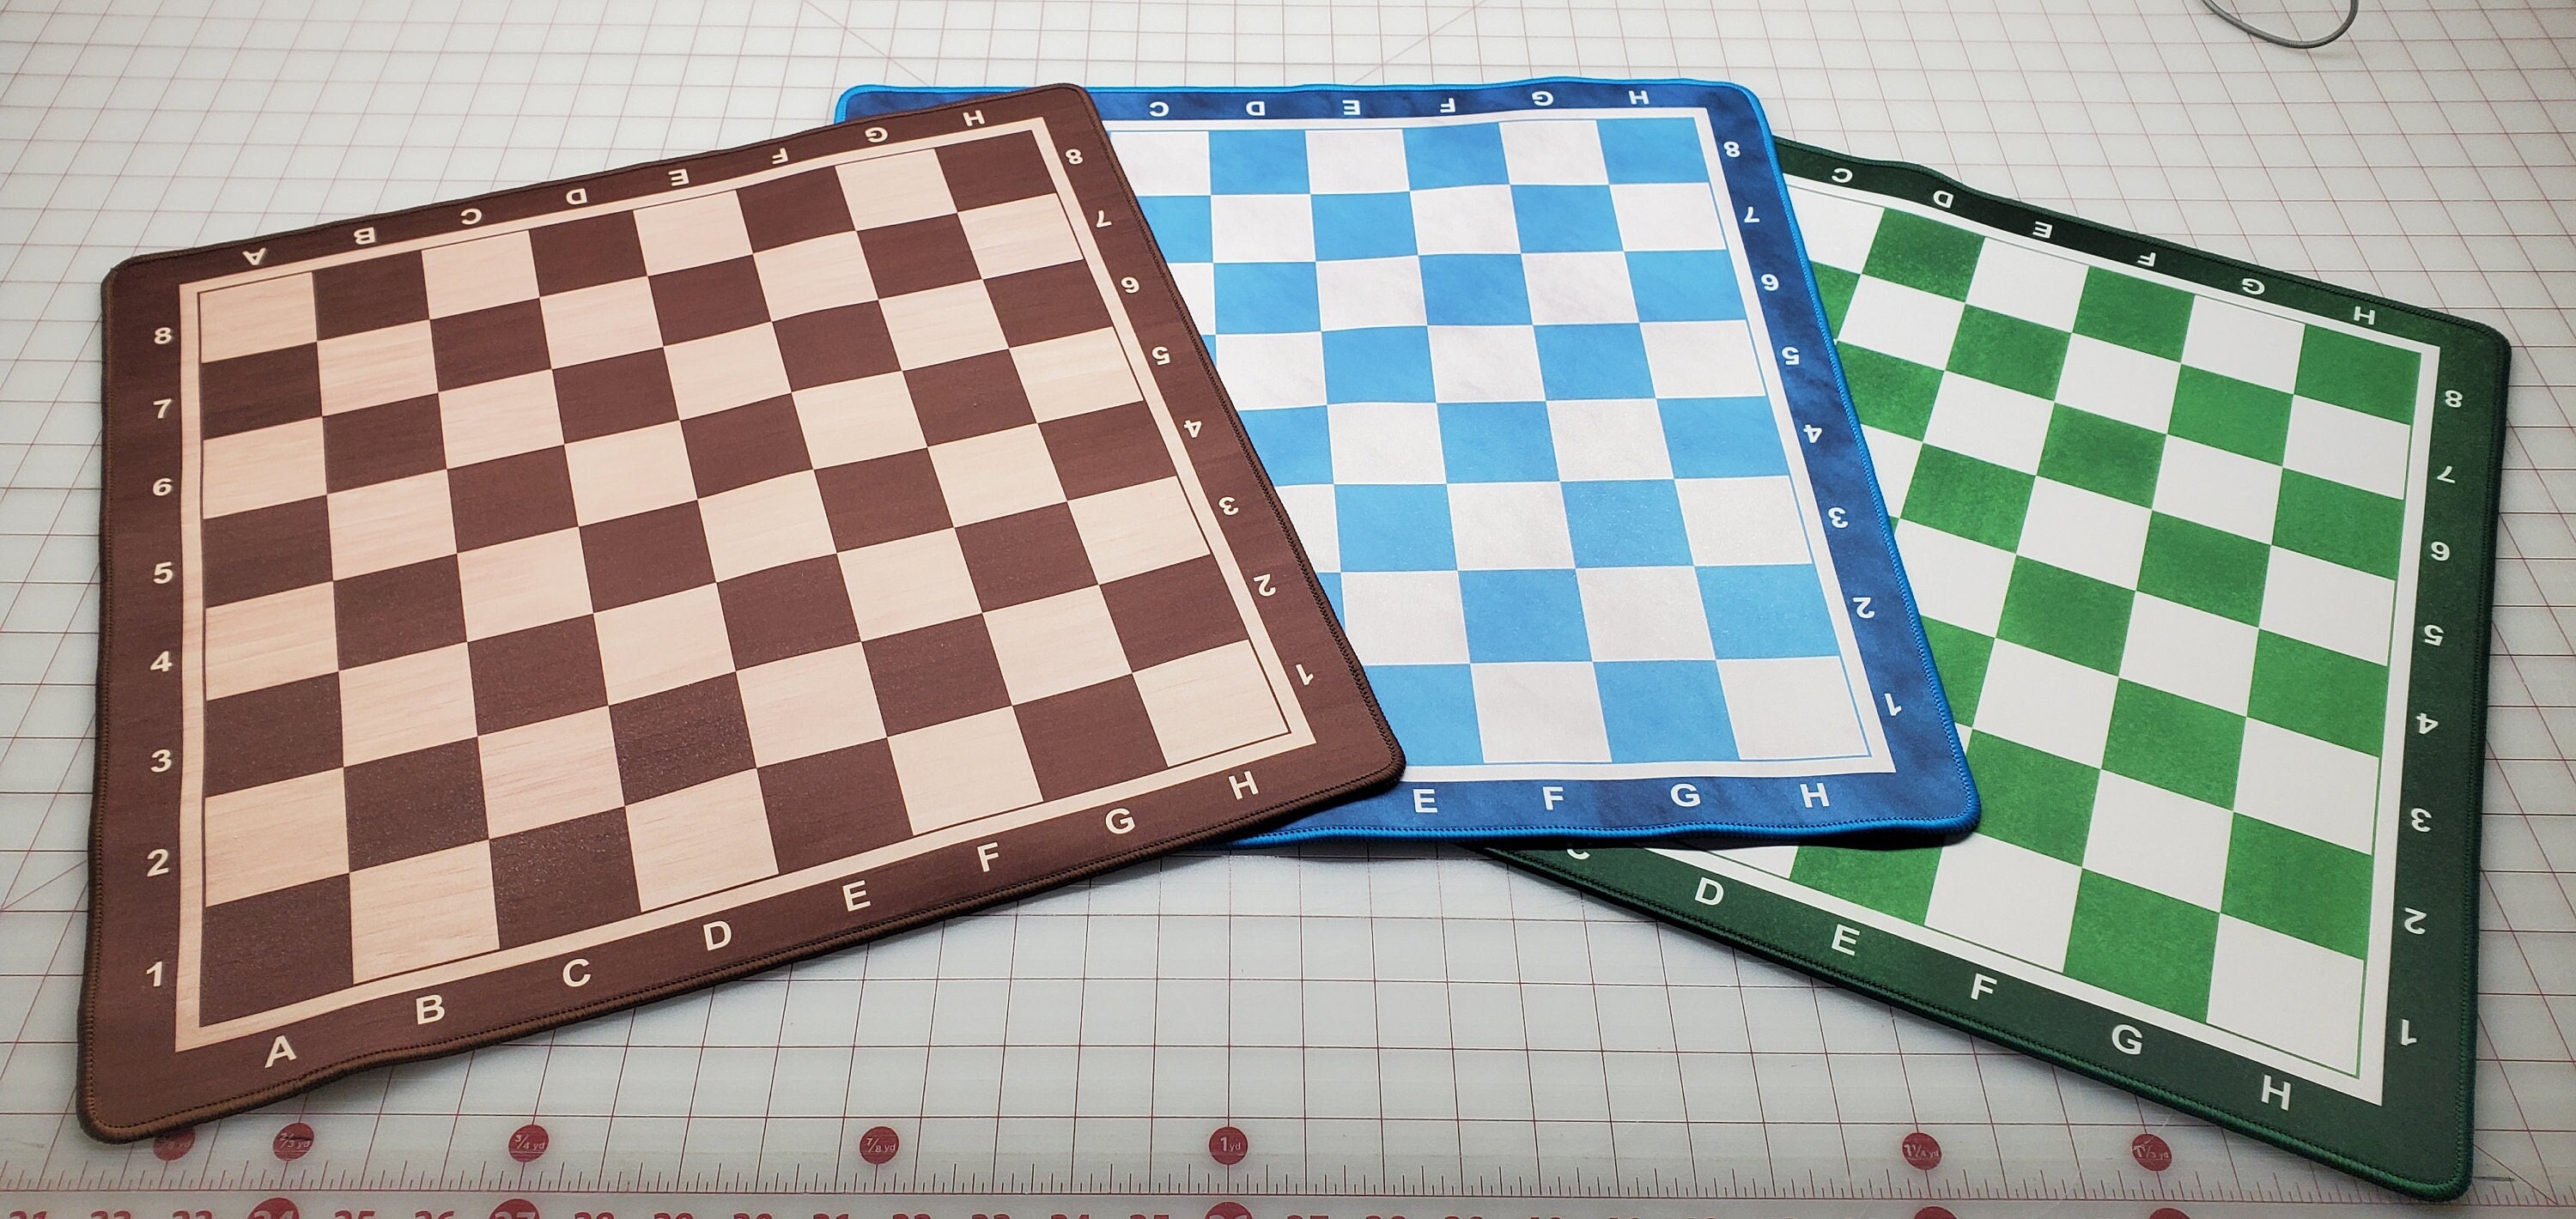  WE Games Best Value Tournament Chess Set w/ a Green Roll Up  Vinyl Board, Plastic Pieces & Bag : Toys & Games